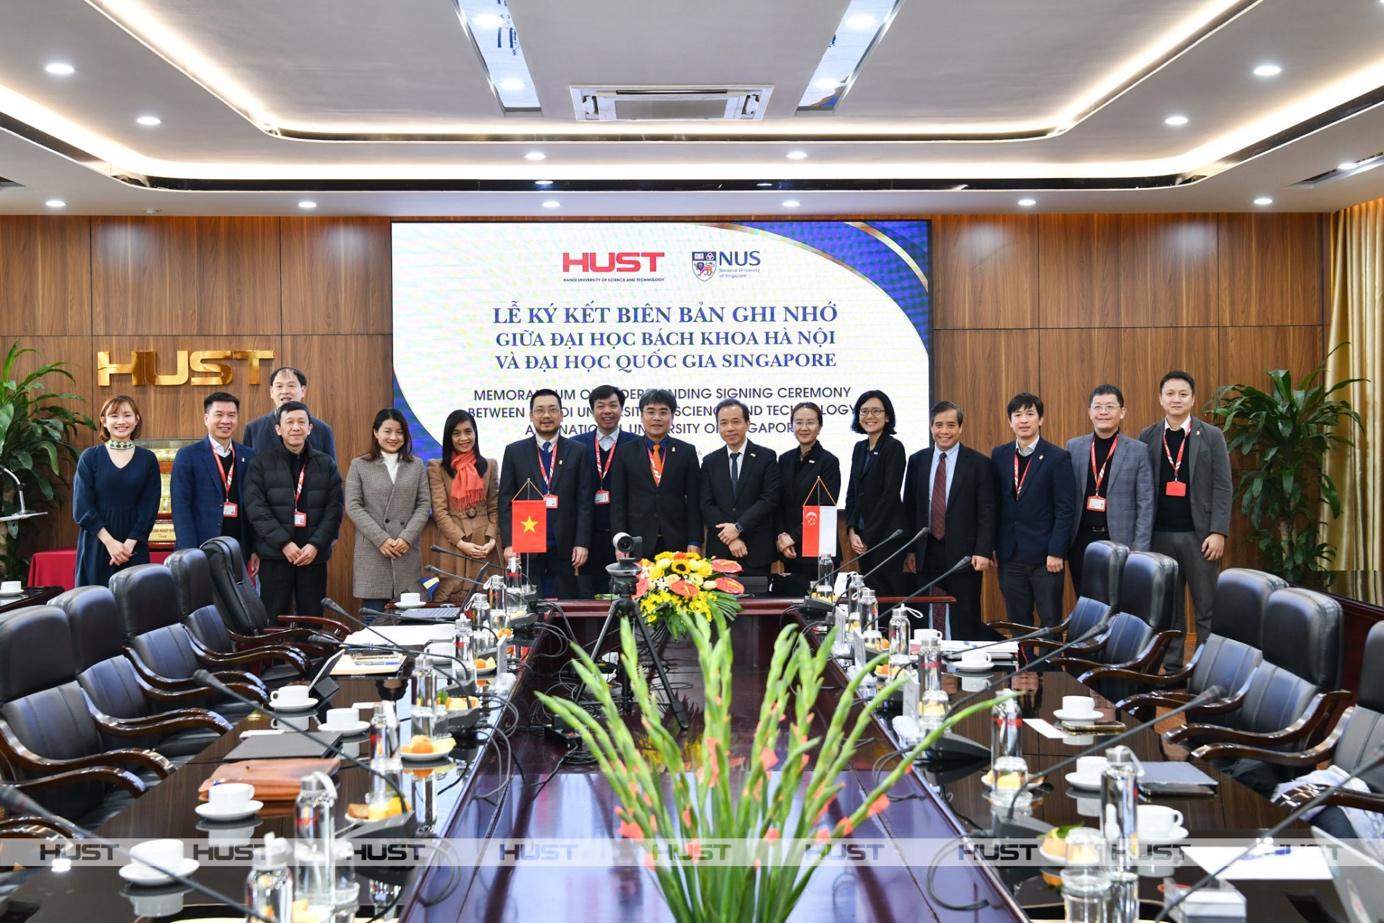 Promoting cooperation between Hanoi University of Science and Technology and National University of Singapore